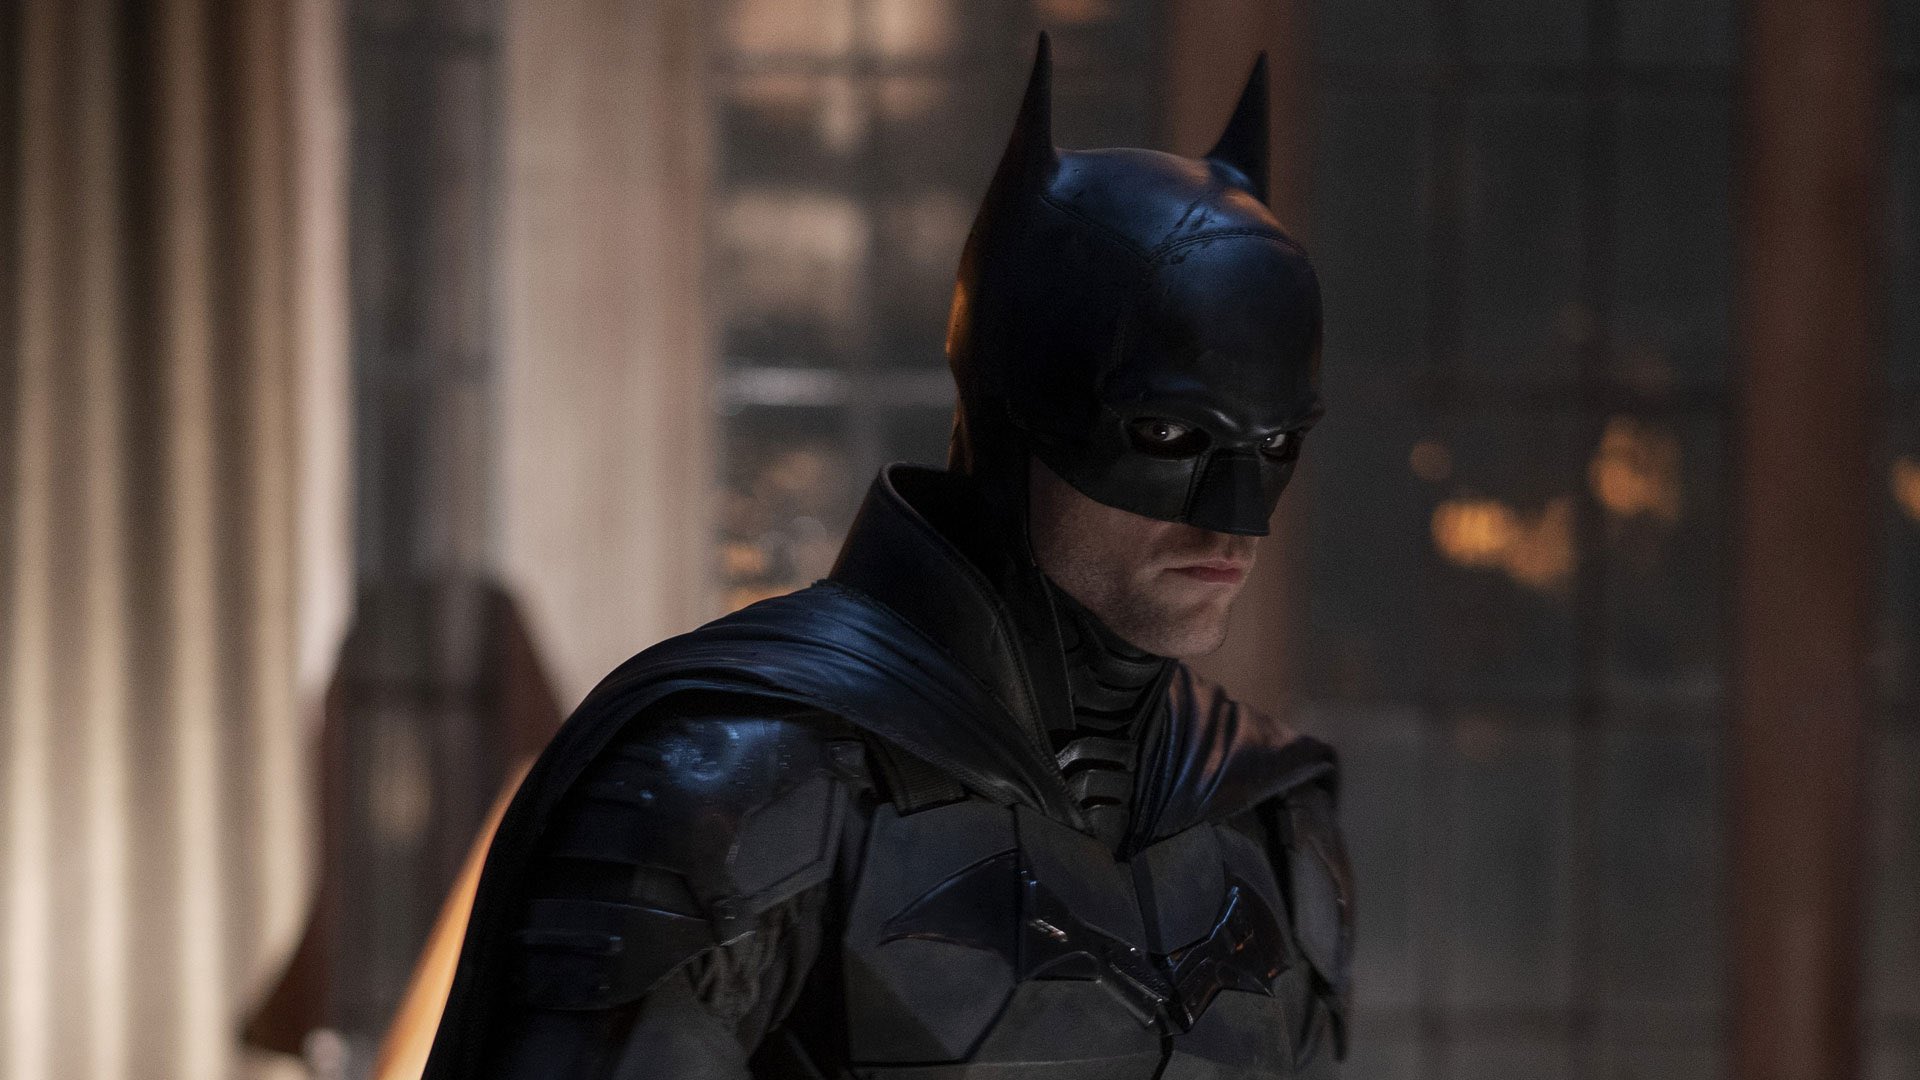 The Batman: Part II Release Date, Cast, Plot, and Everything We Know